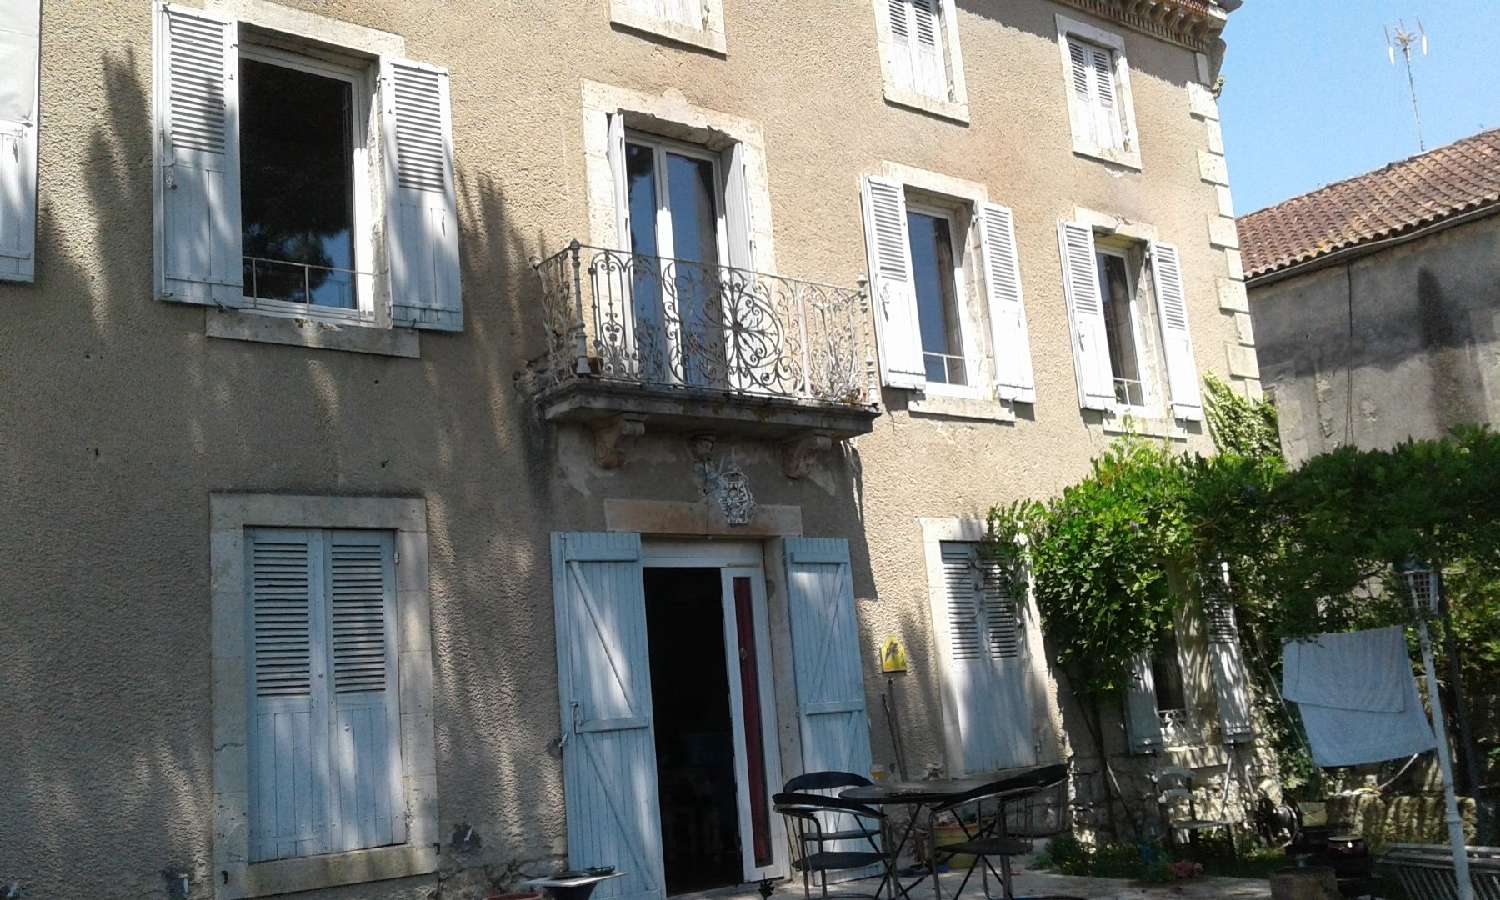  for sale village house Lectoure Gers 2